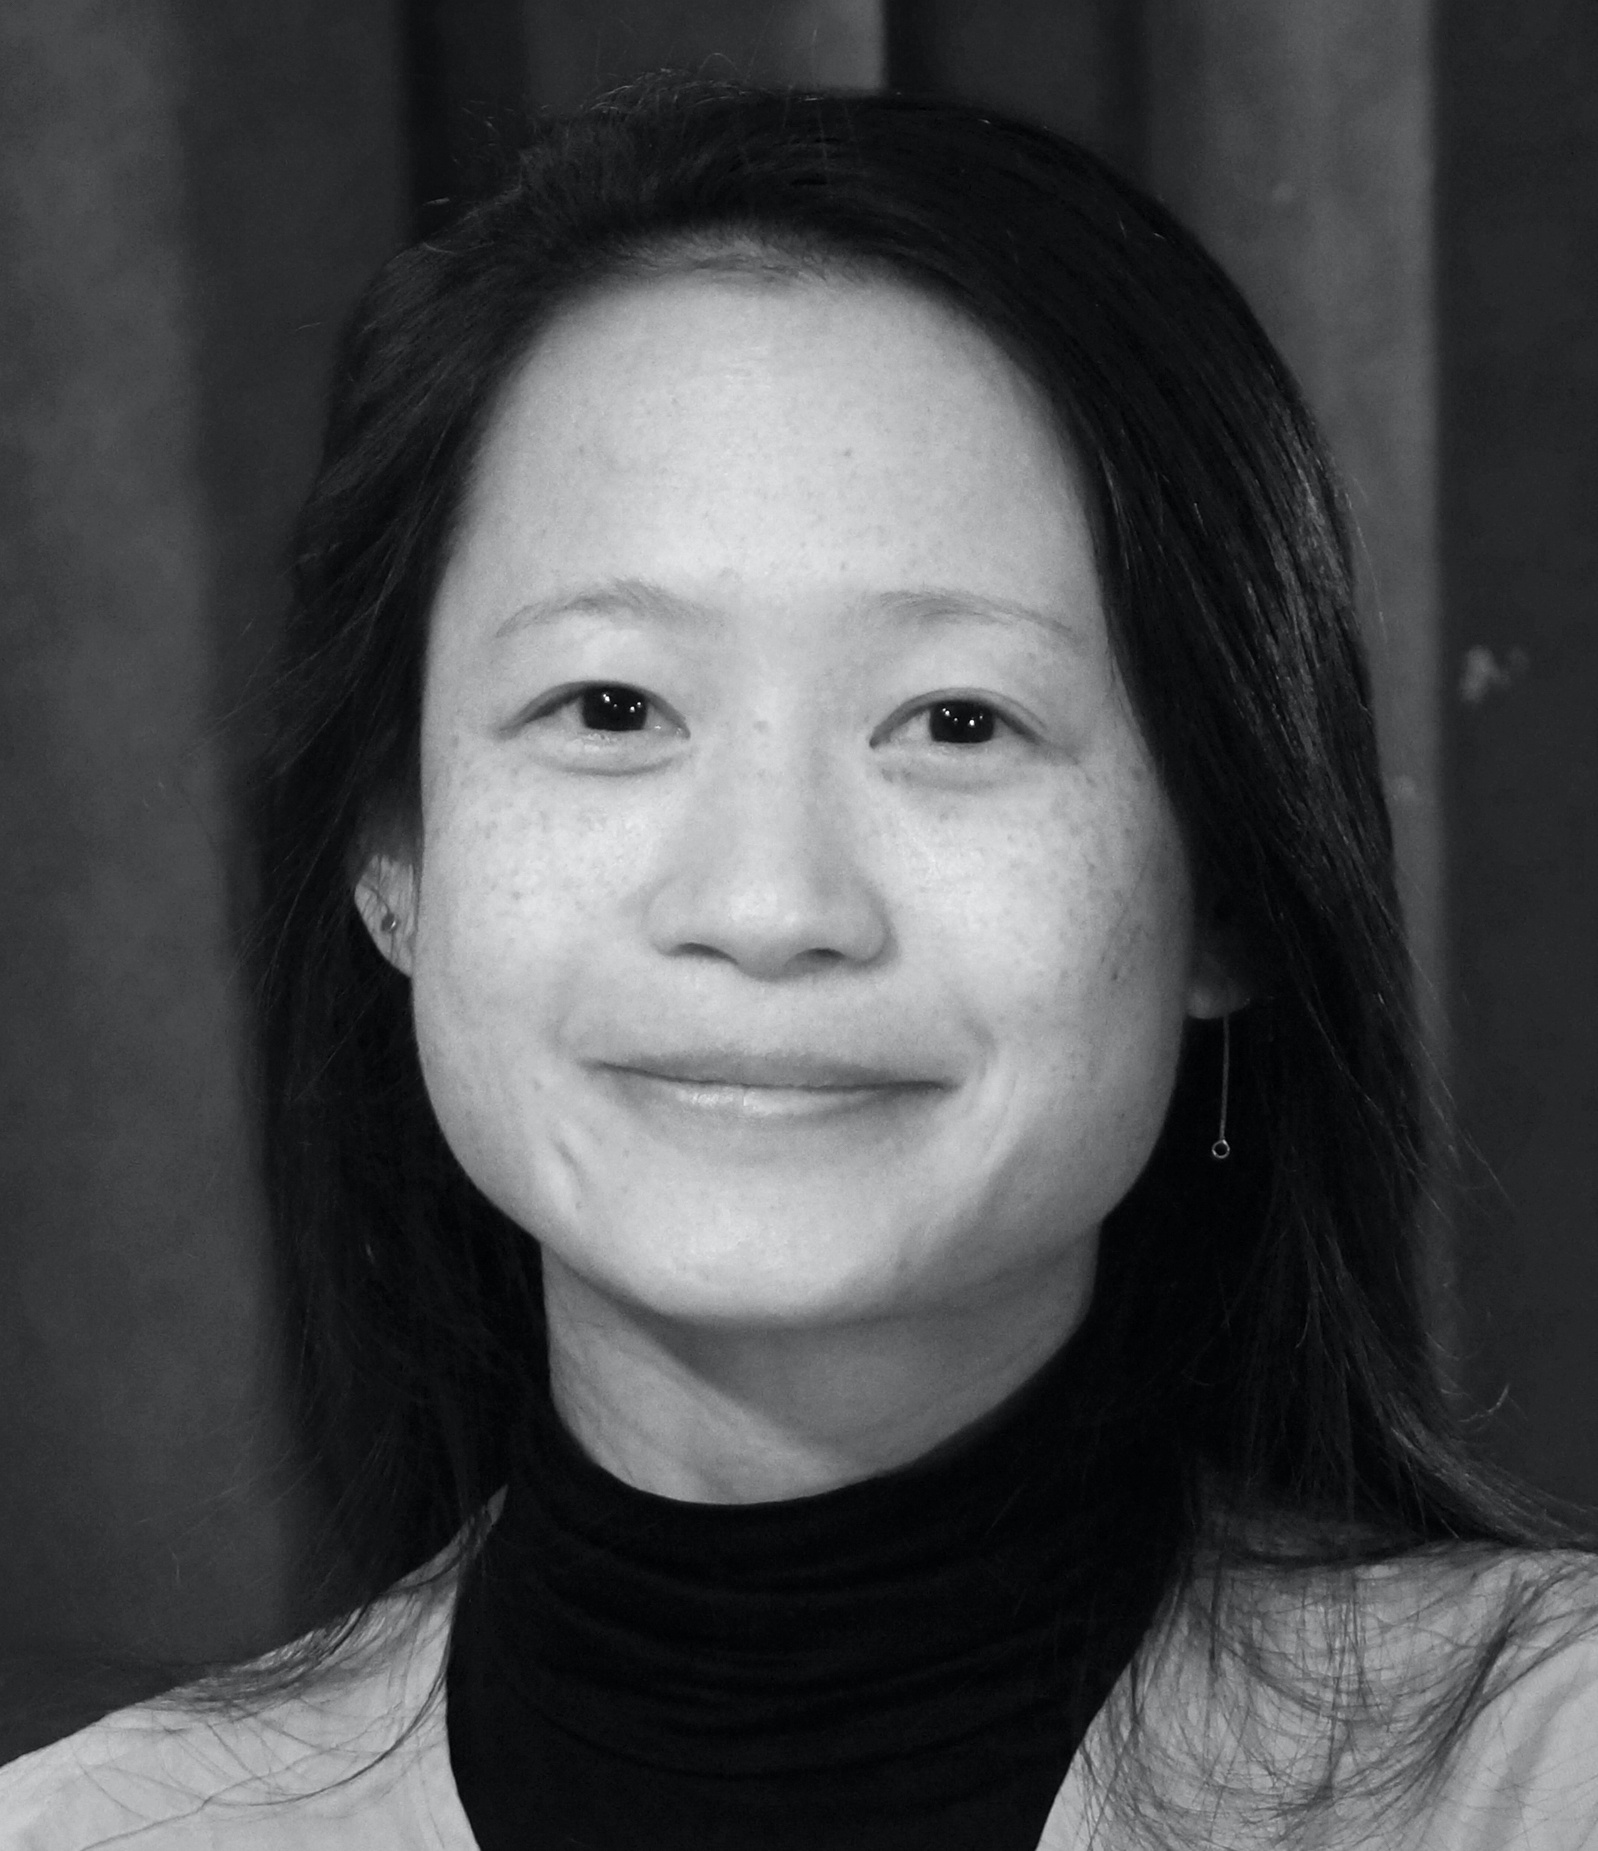 A black-and-white portrait of lighting designer Serena Wong, smiling with closed lips. She has straight black hair and wears a black turtle neck under a sweater lighter in color. 